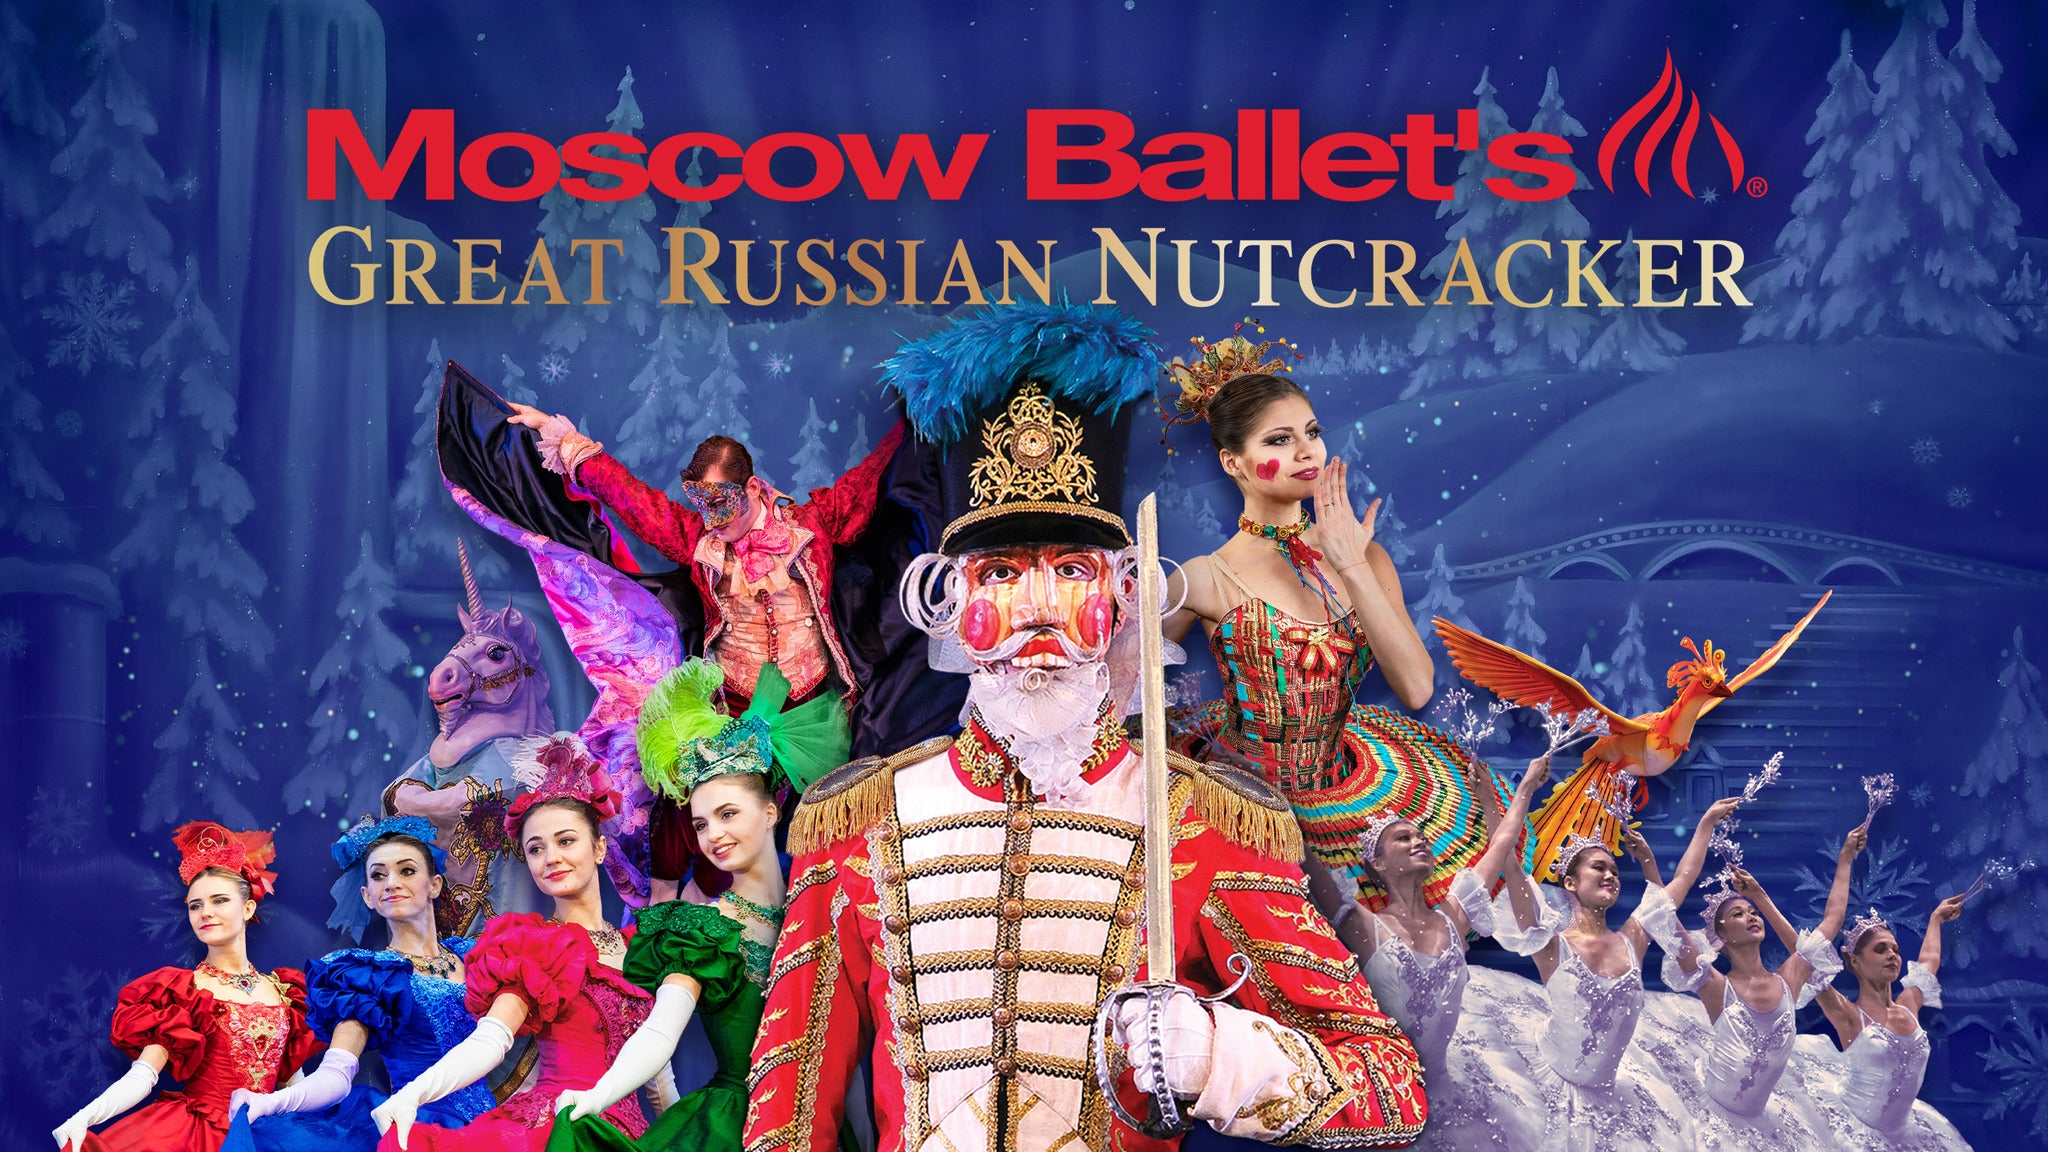 Moscow Ballet's Great Russian Nutcracker Tickets | Event Dates